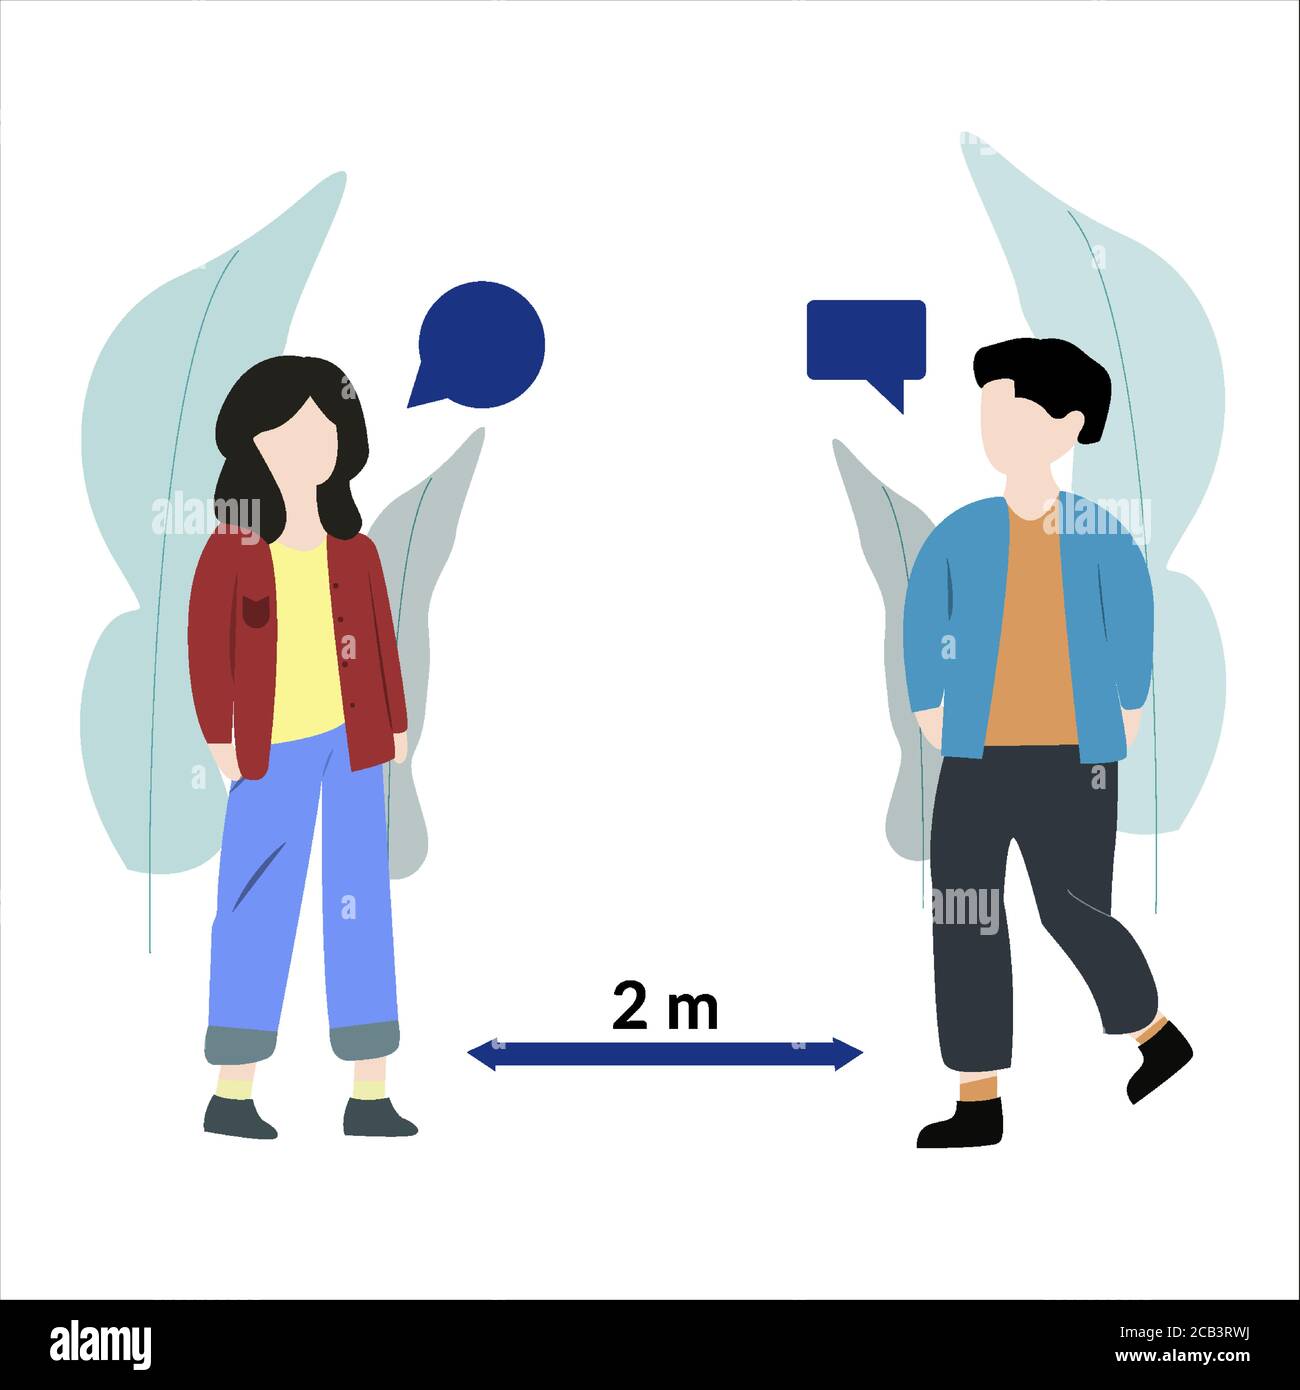 Social distancing. Woman and men keep distance in flat cartoon style. Protection from COVID-19 coronavirus vector illustration Stock Vector